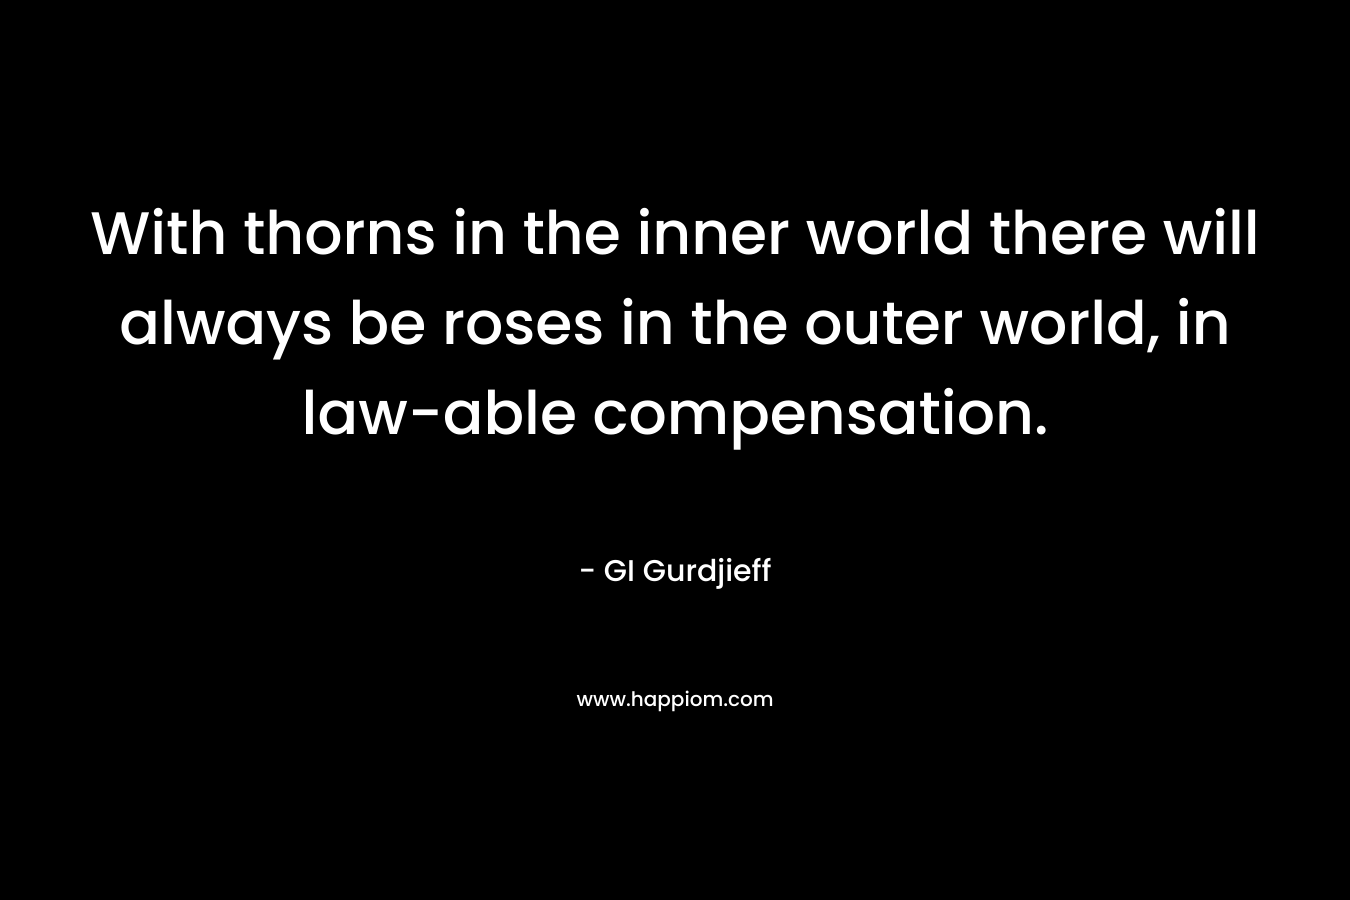 With thorns in the inner world there will always be roses in the outer world, in law-able compensation.